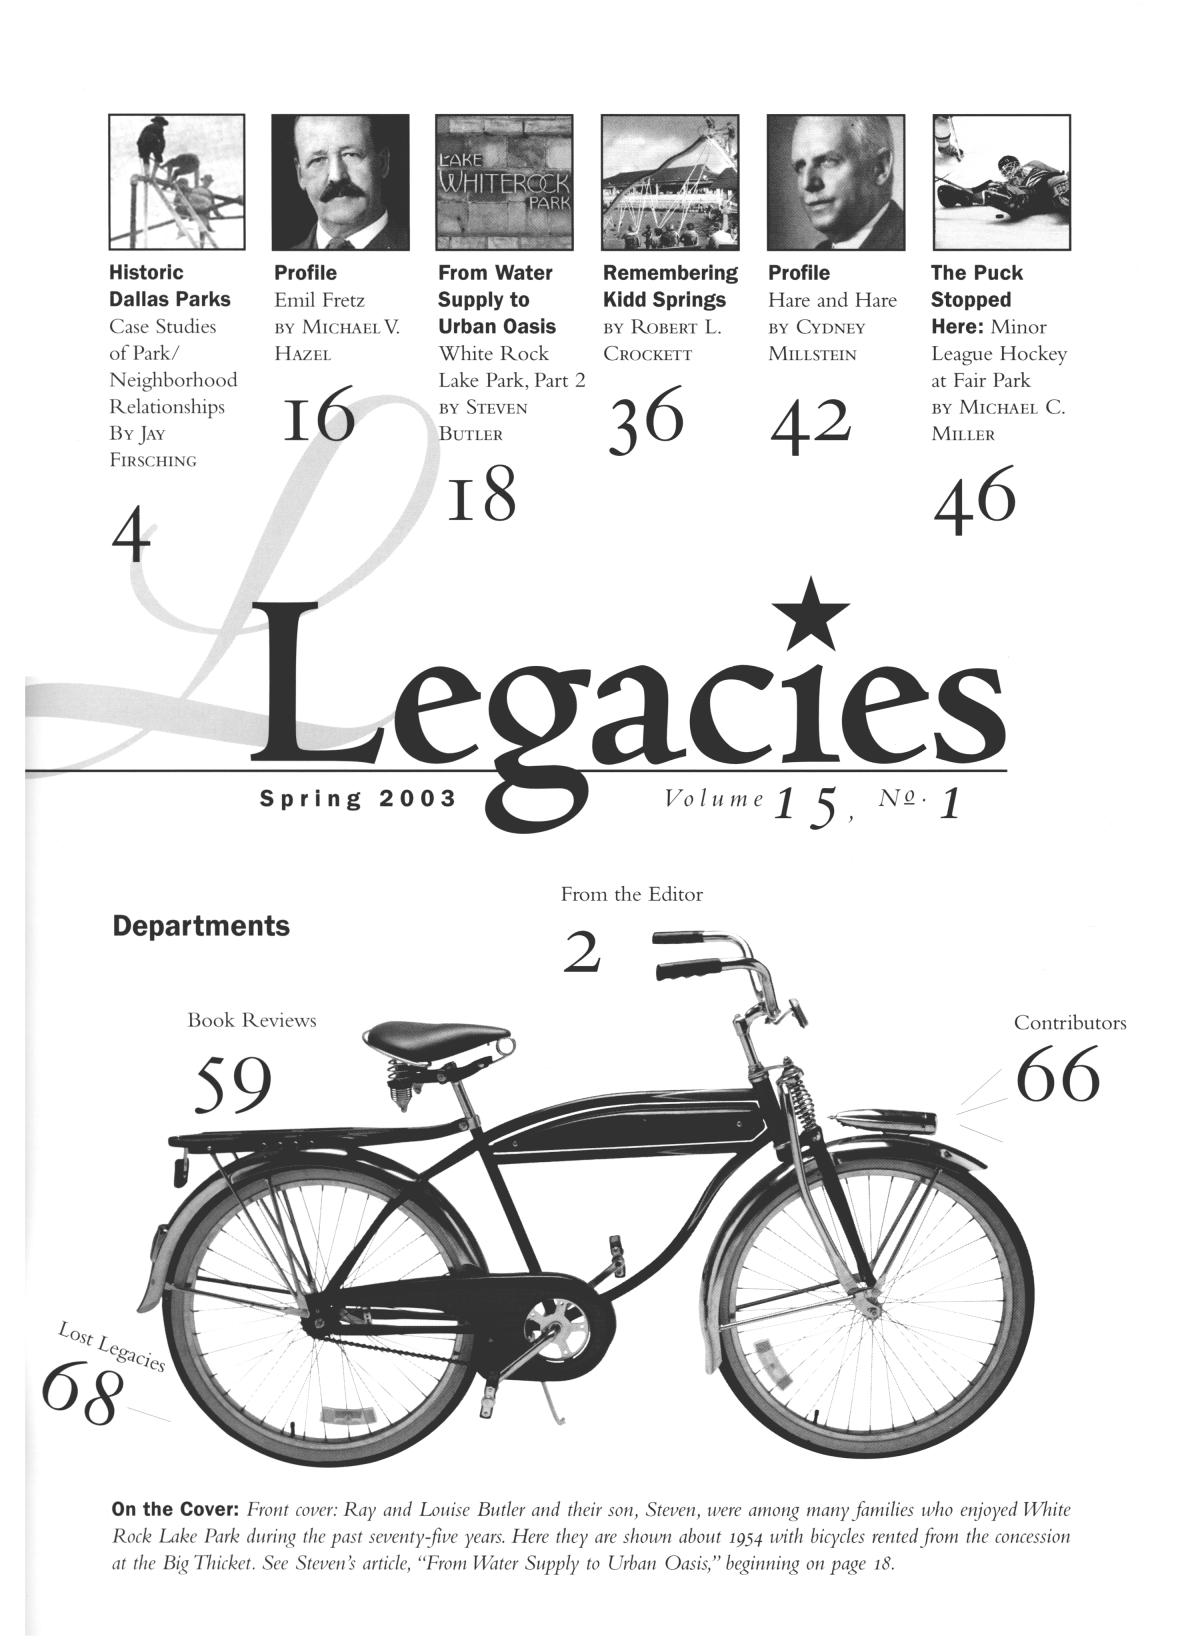 Legacies: A History Journal for Dallas and North Central Texas, Volume 15, Number 1, Spring, 2003
                                                
                                                    1
                                                